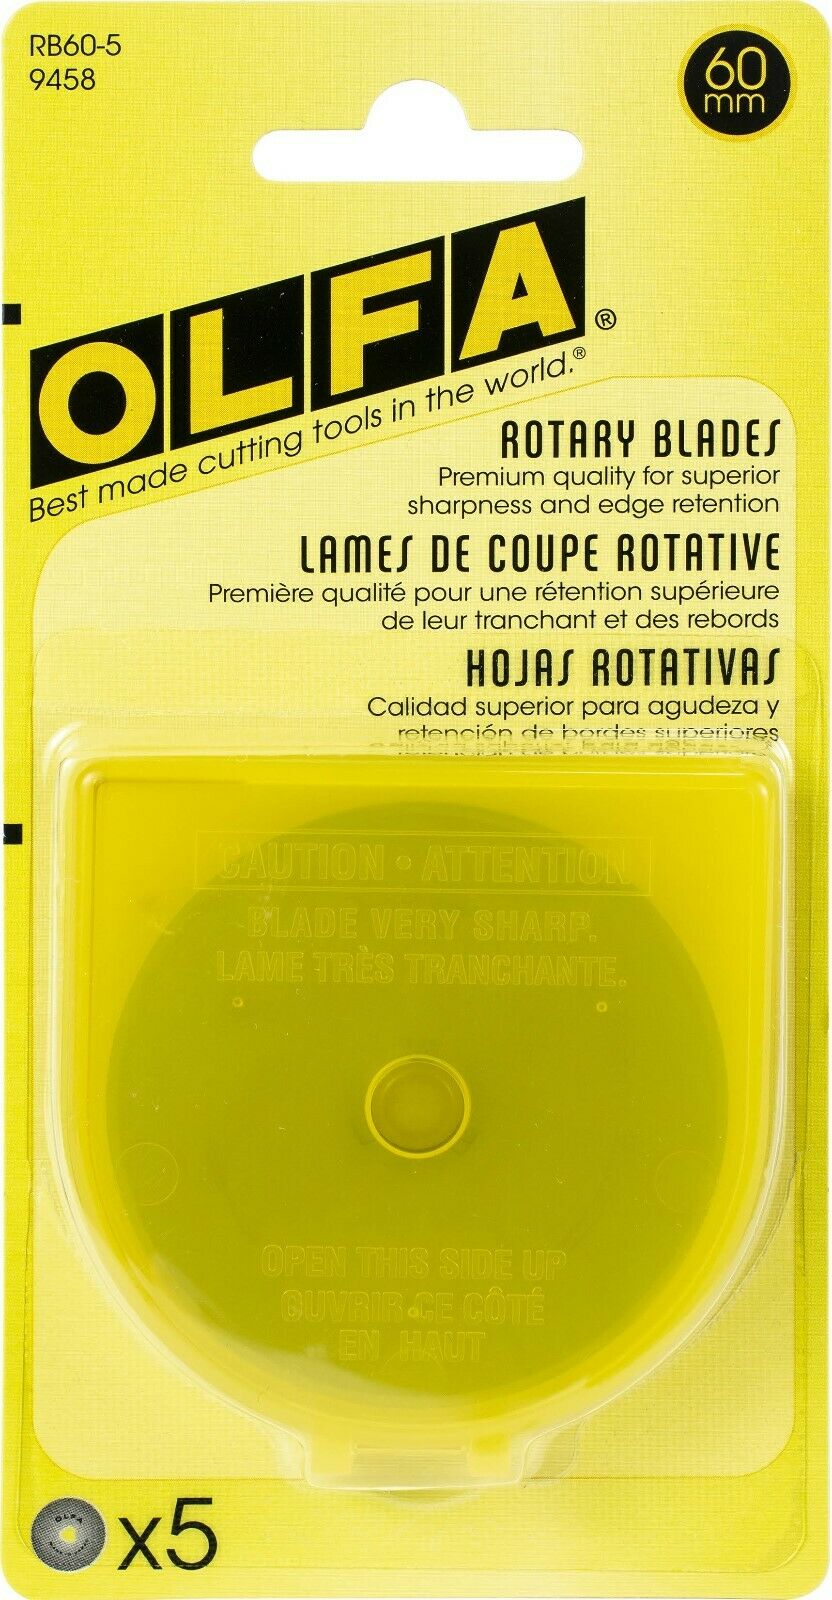 Olfa 60mm Rotary Replacement Blades - 5pk #rb60-5 New